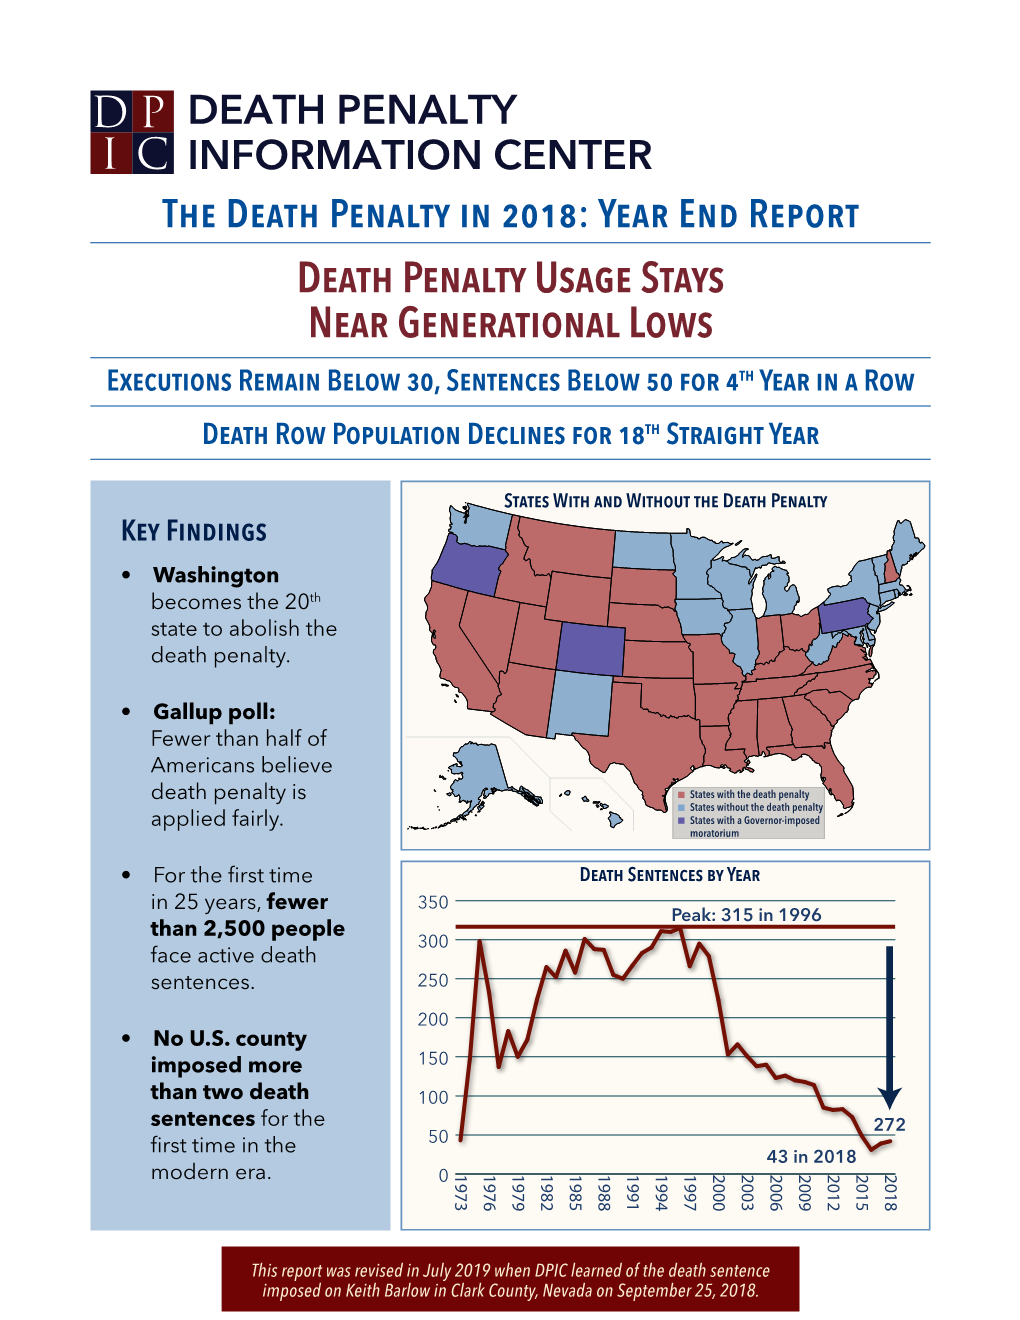 Year End Report Death Penalty Usage Stays Near Generational